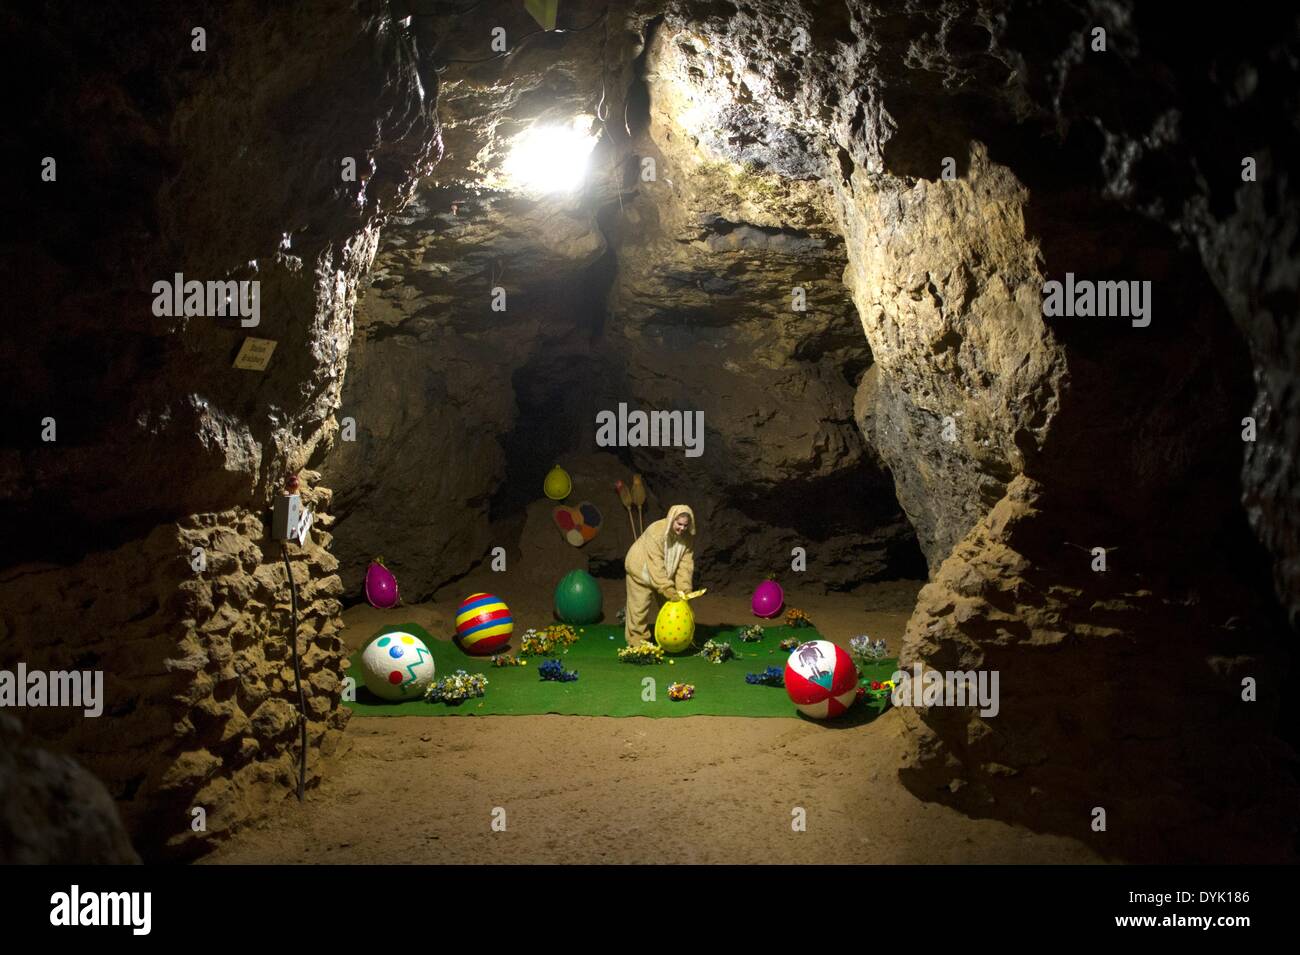 Ennepetal, Germany. 20th Apr, 2014. A woman dressed up as 'Easter bunny Lilly' prepares the Easter decoration for the next guided tour through the Kluterthoehle cave in Ennepetal, Germany, 20 April 2014. During the tour wizzard Abraxus will help Easter bunny Lilly and the attending children to recover vanished Easter eggs for the Easter celebrations. The Kluterthoehle cave was regarded to be the biggest cave in Germany until 1959. Today it is mainly used as a spa for asthmatics. Photo: JONAS GUETTLER/dpa/Alamy Live News Stock Photo